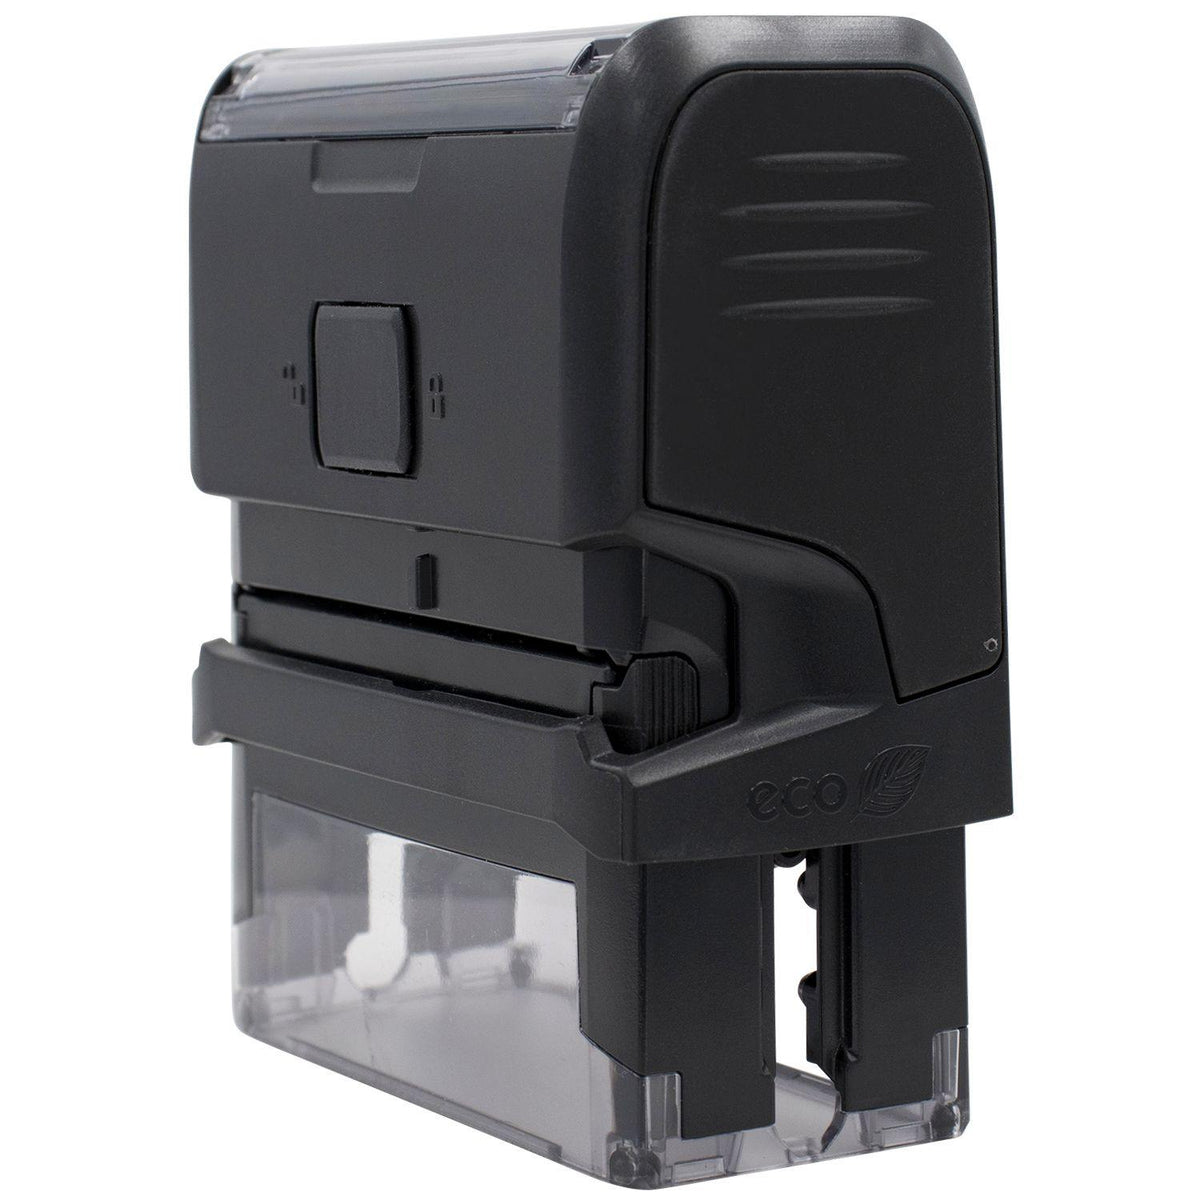 Self-Inking Special Handling Stamp - Engineer Seal Stamps - Brand_Trodat, Impression Size_Small, Stamp Type_Self-Inking Stamp, Type of Use_Postal &amp; Mailing, Type of Use_Shipping &amp; Receiving